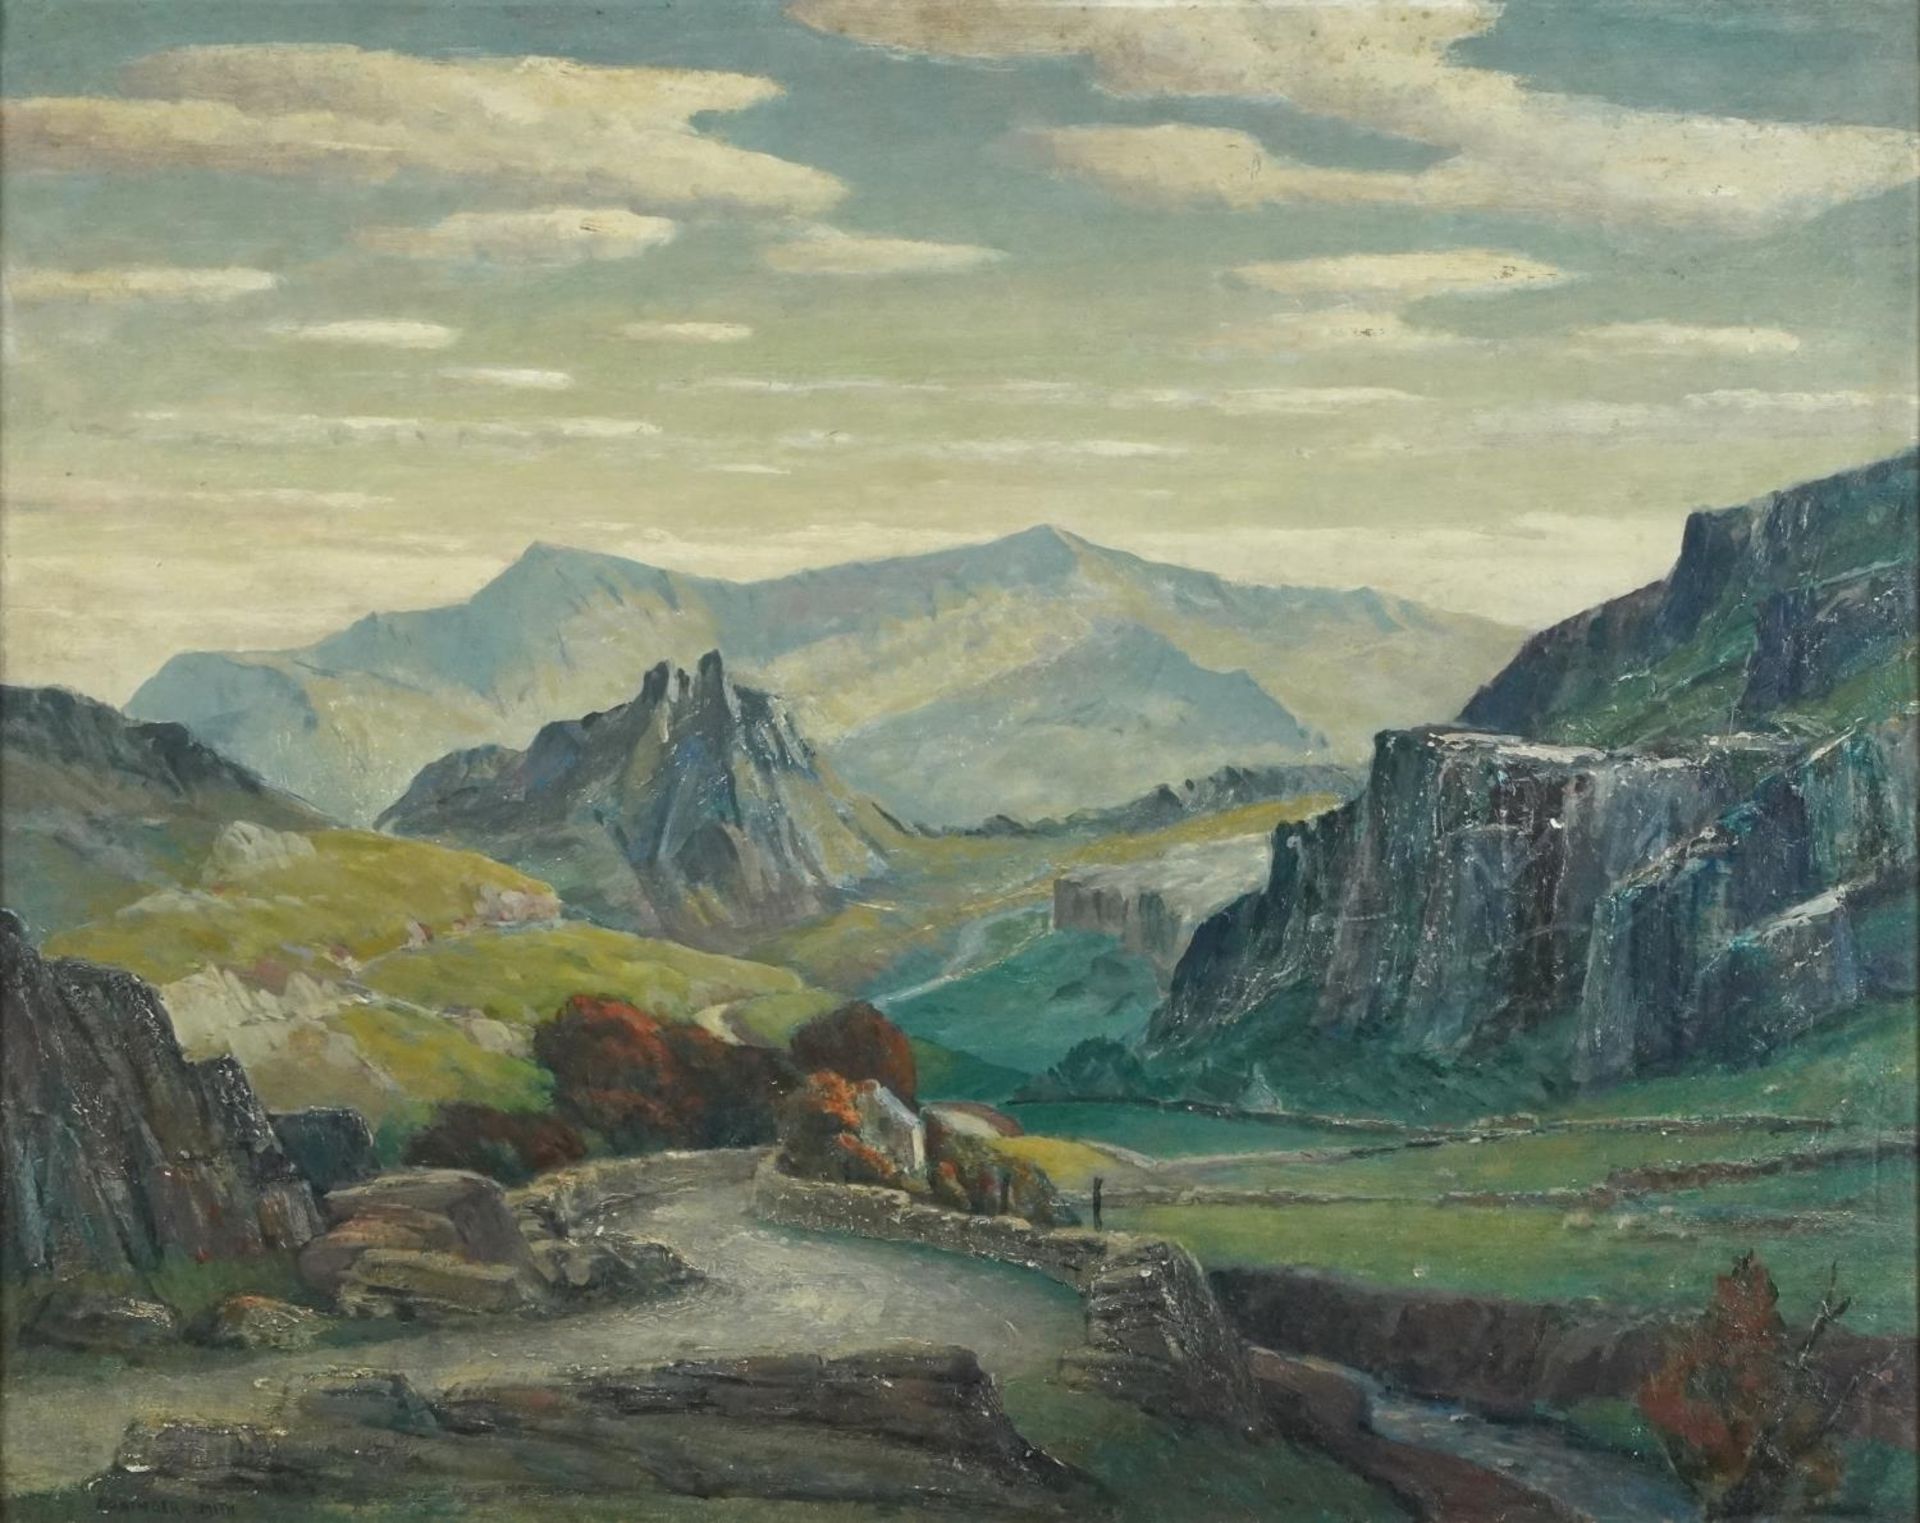 Grainger Smith - Road to Rhyd, oil on board, details verso, mounted and framed, 49.5cm x 39.5cm